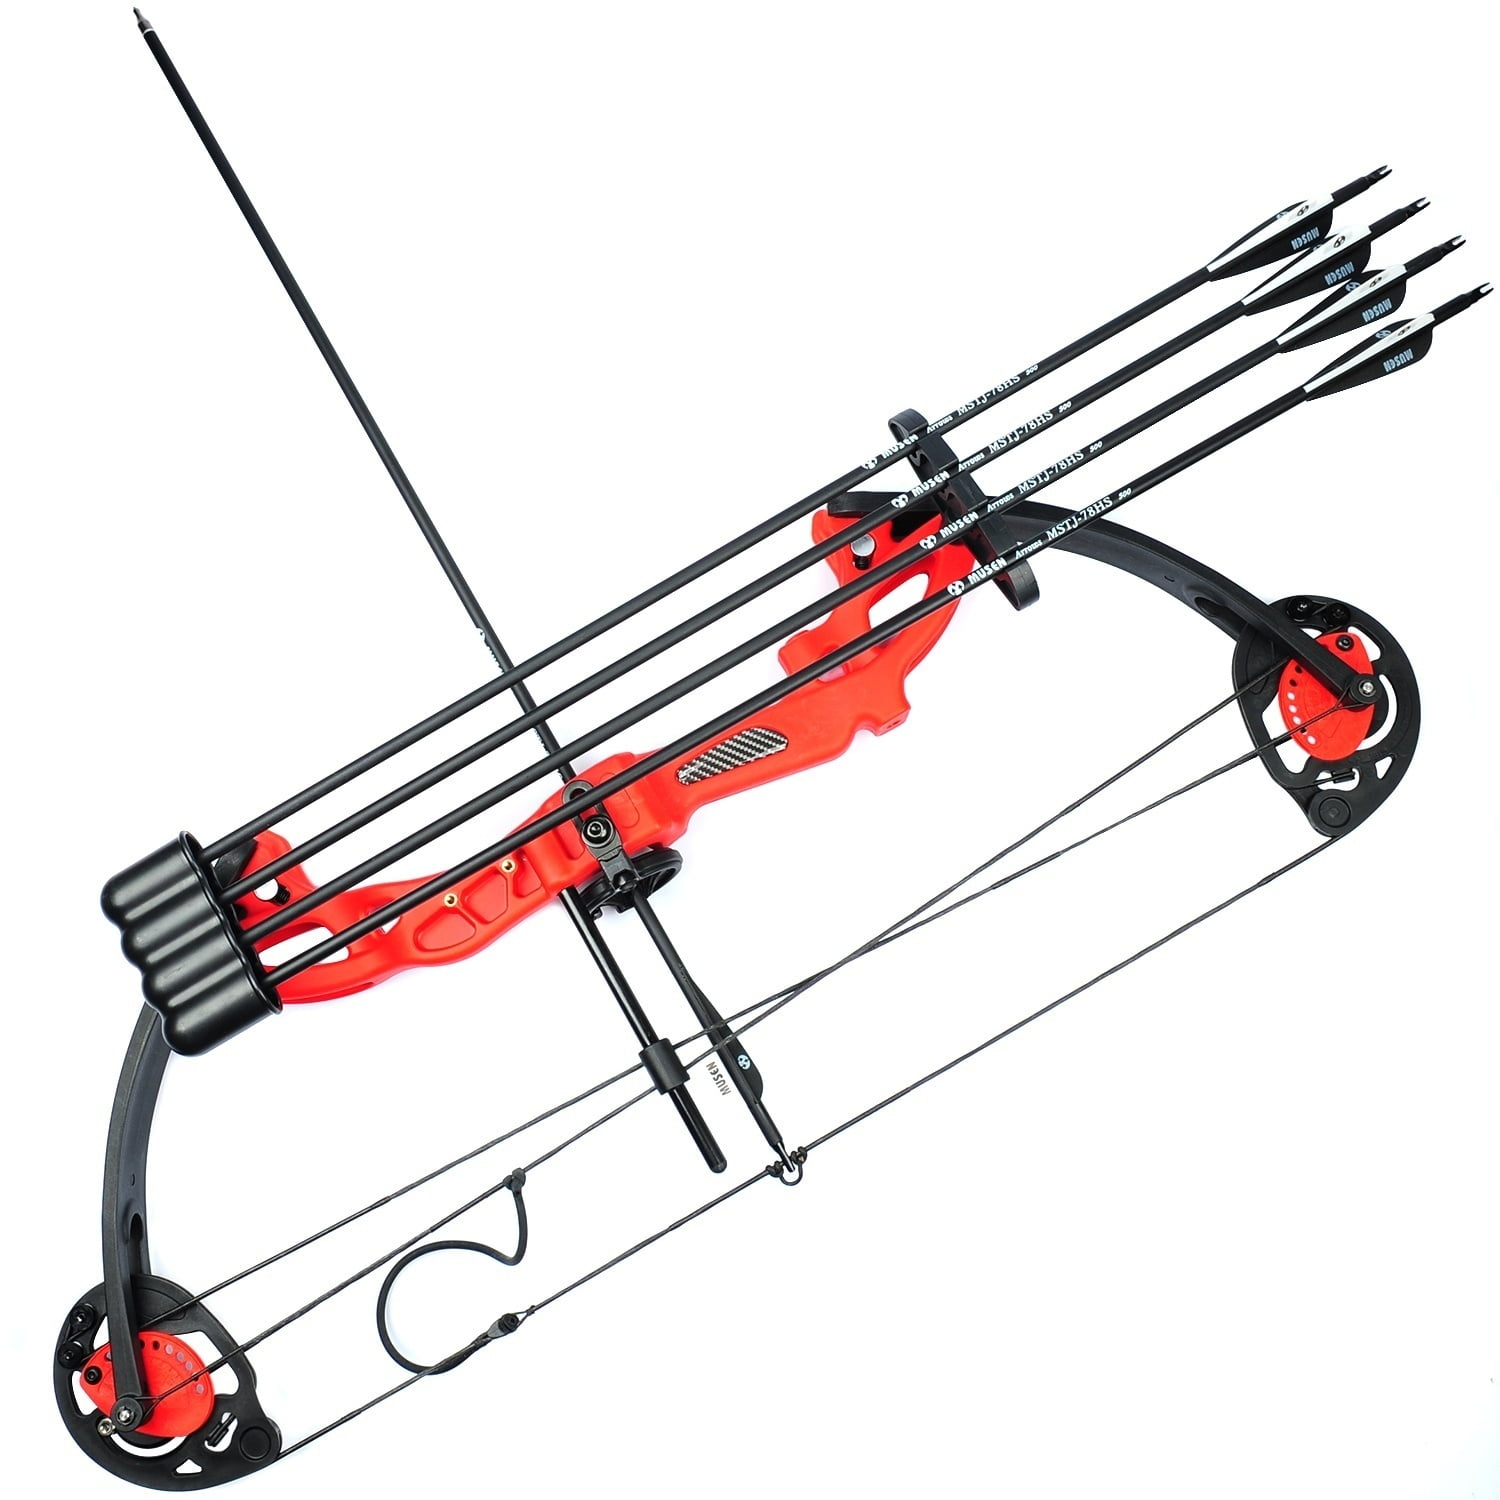 Details about   Petron Stealth Youth Recurve Shoot Through Bow Archery Kit 